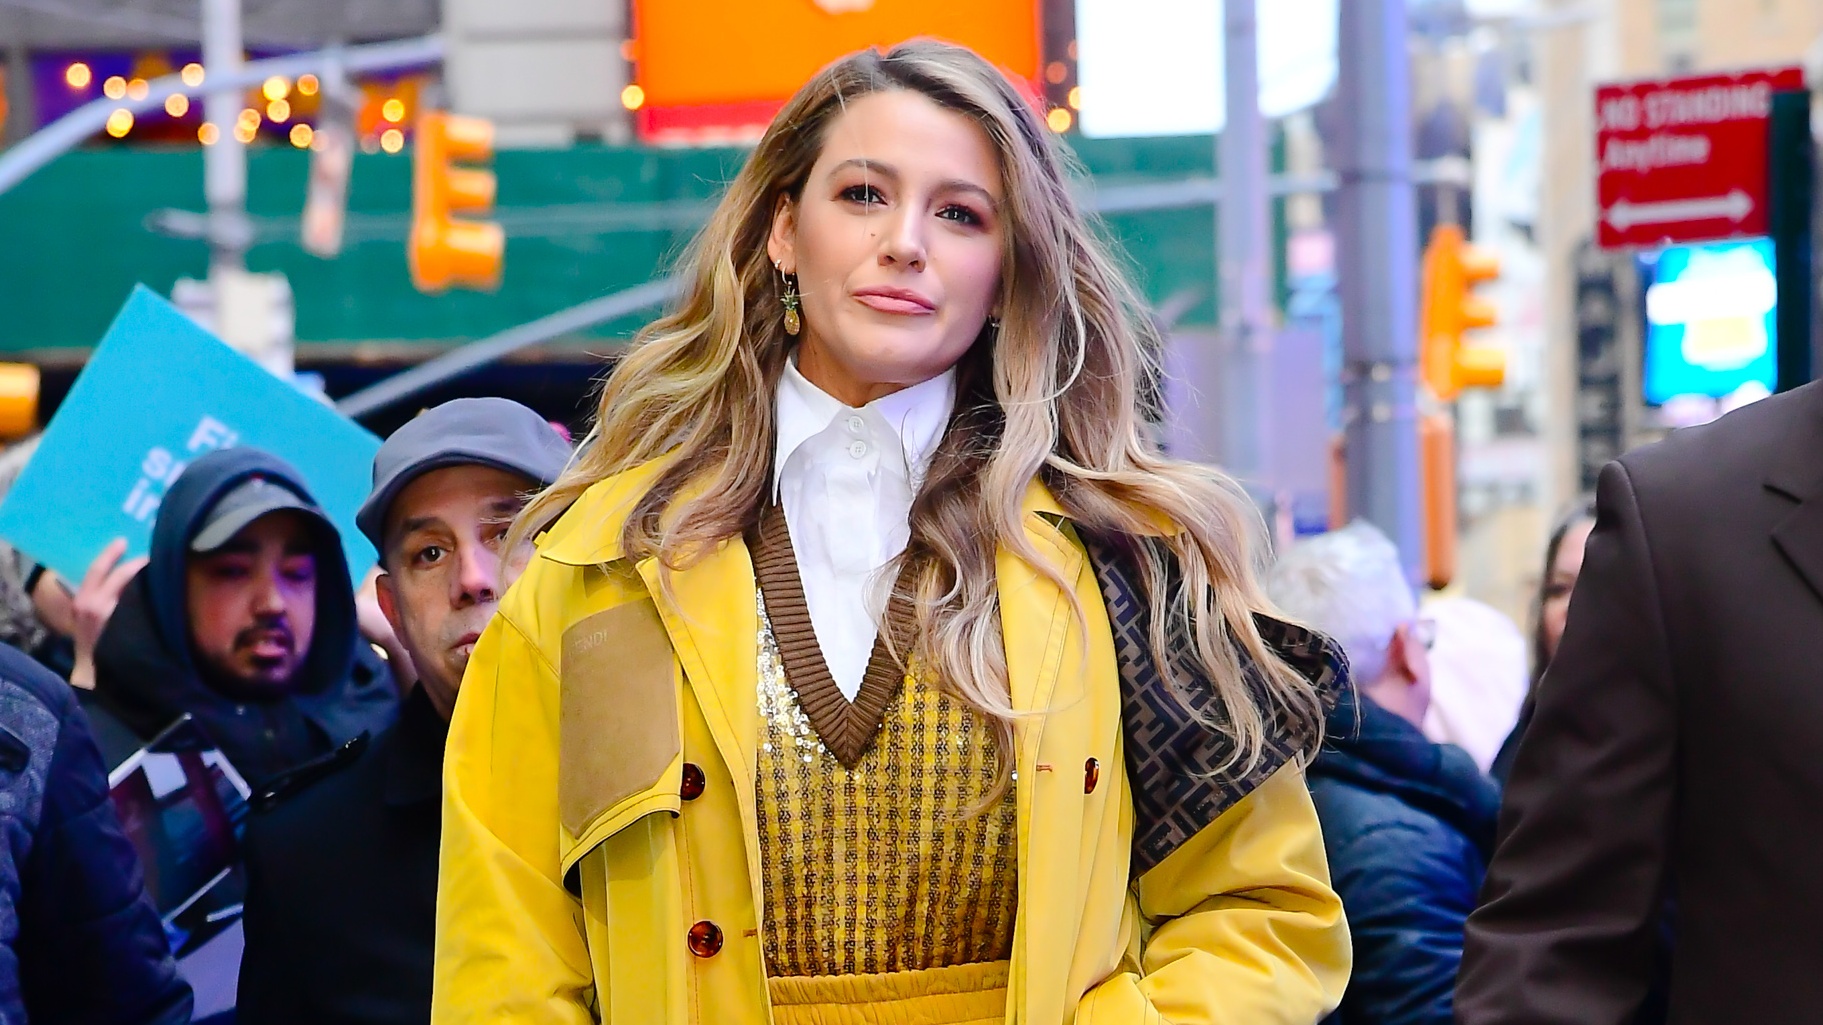 Blake Lively's Best Outfits And Style Moments - Grazia